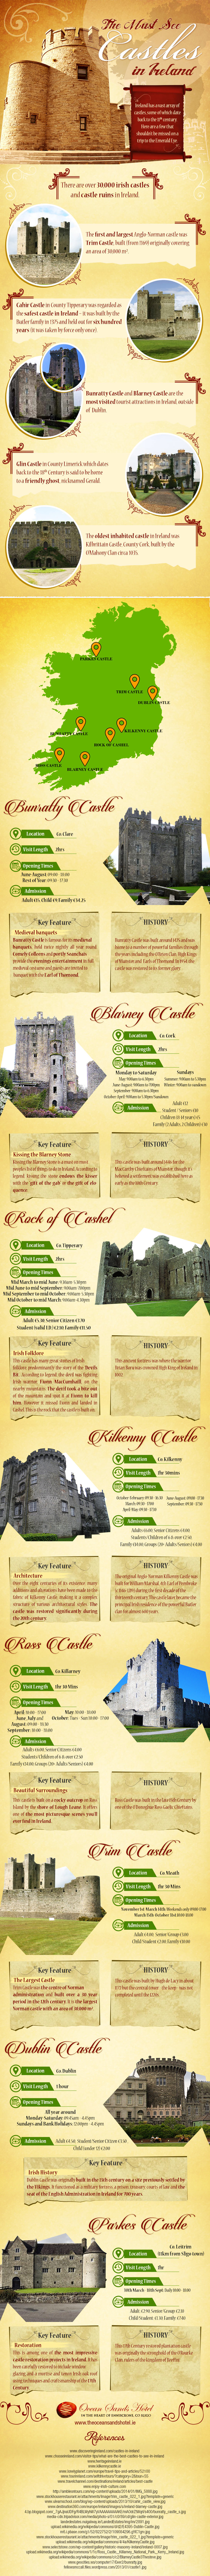 Best Castles to See in Ireland - Travel Infographic